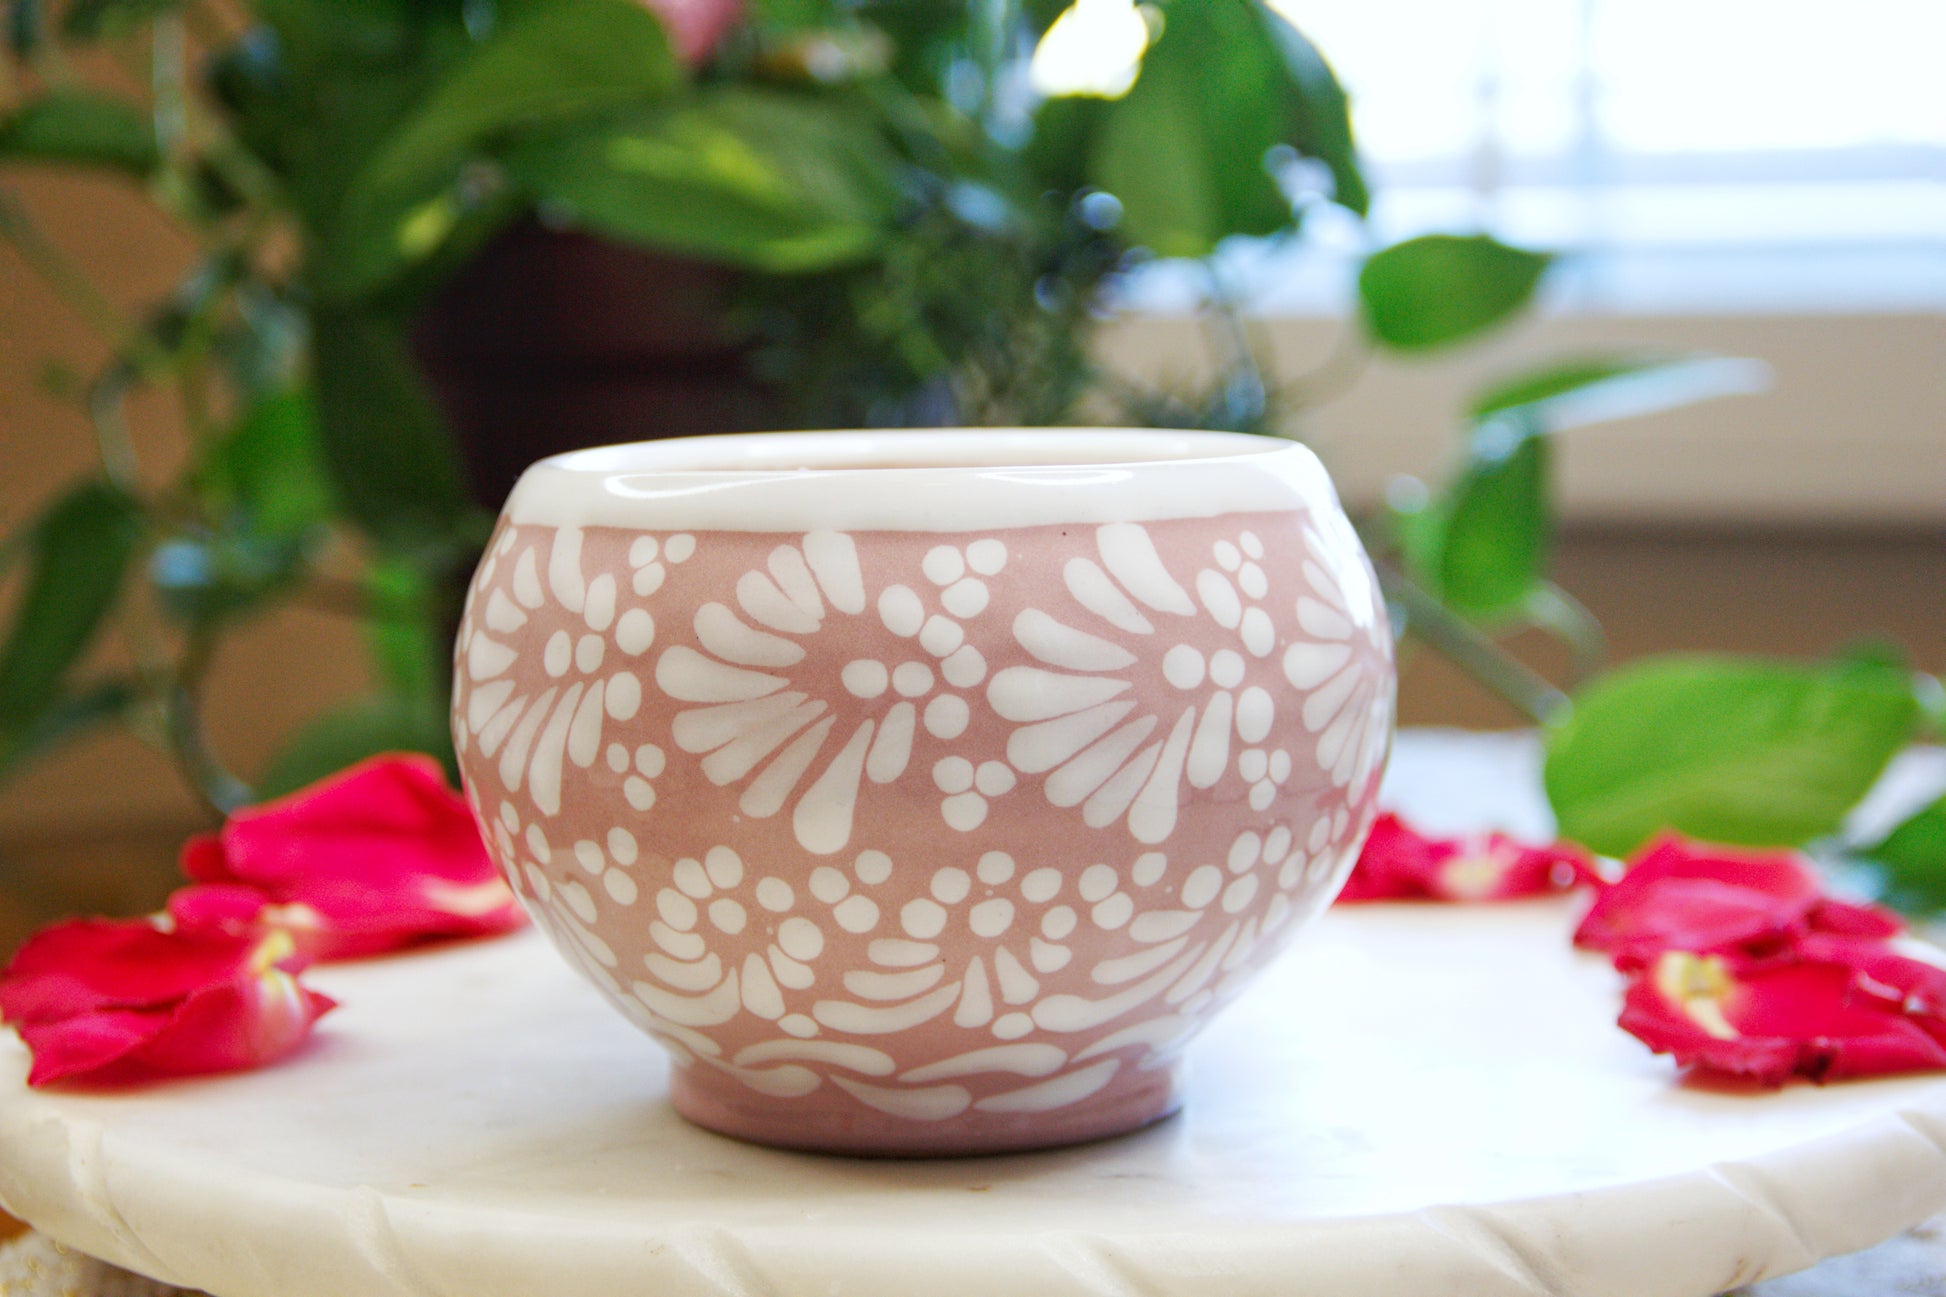 side of an Artisanal candle in a beautiful pink cup with handle, handmade white paint strokes design. Handcrafted by Artisan in Puebla, Mexico. 100% All Natural Soy Candle. Reuse the talavera as home decor or storage.